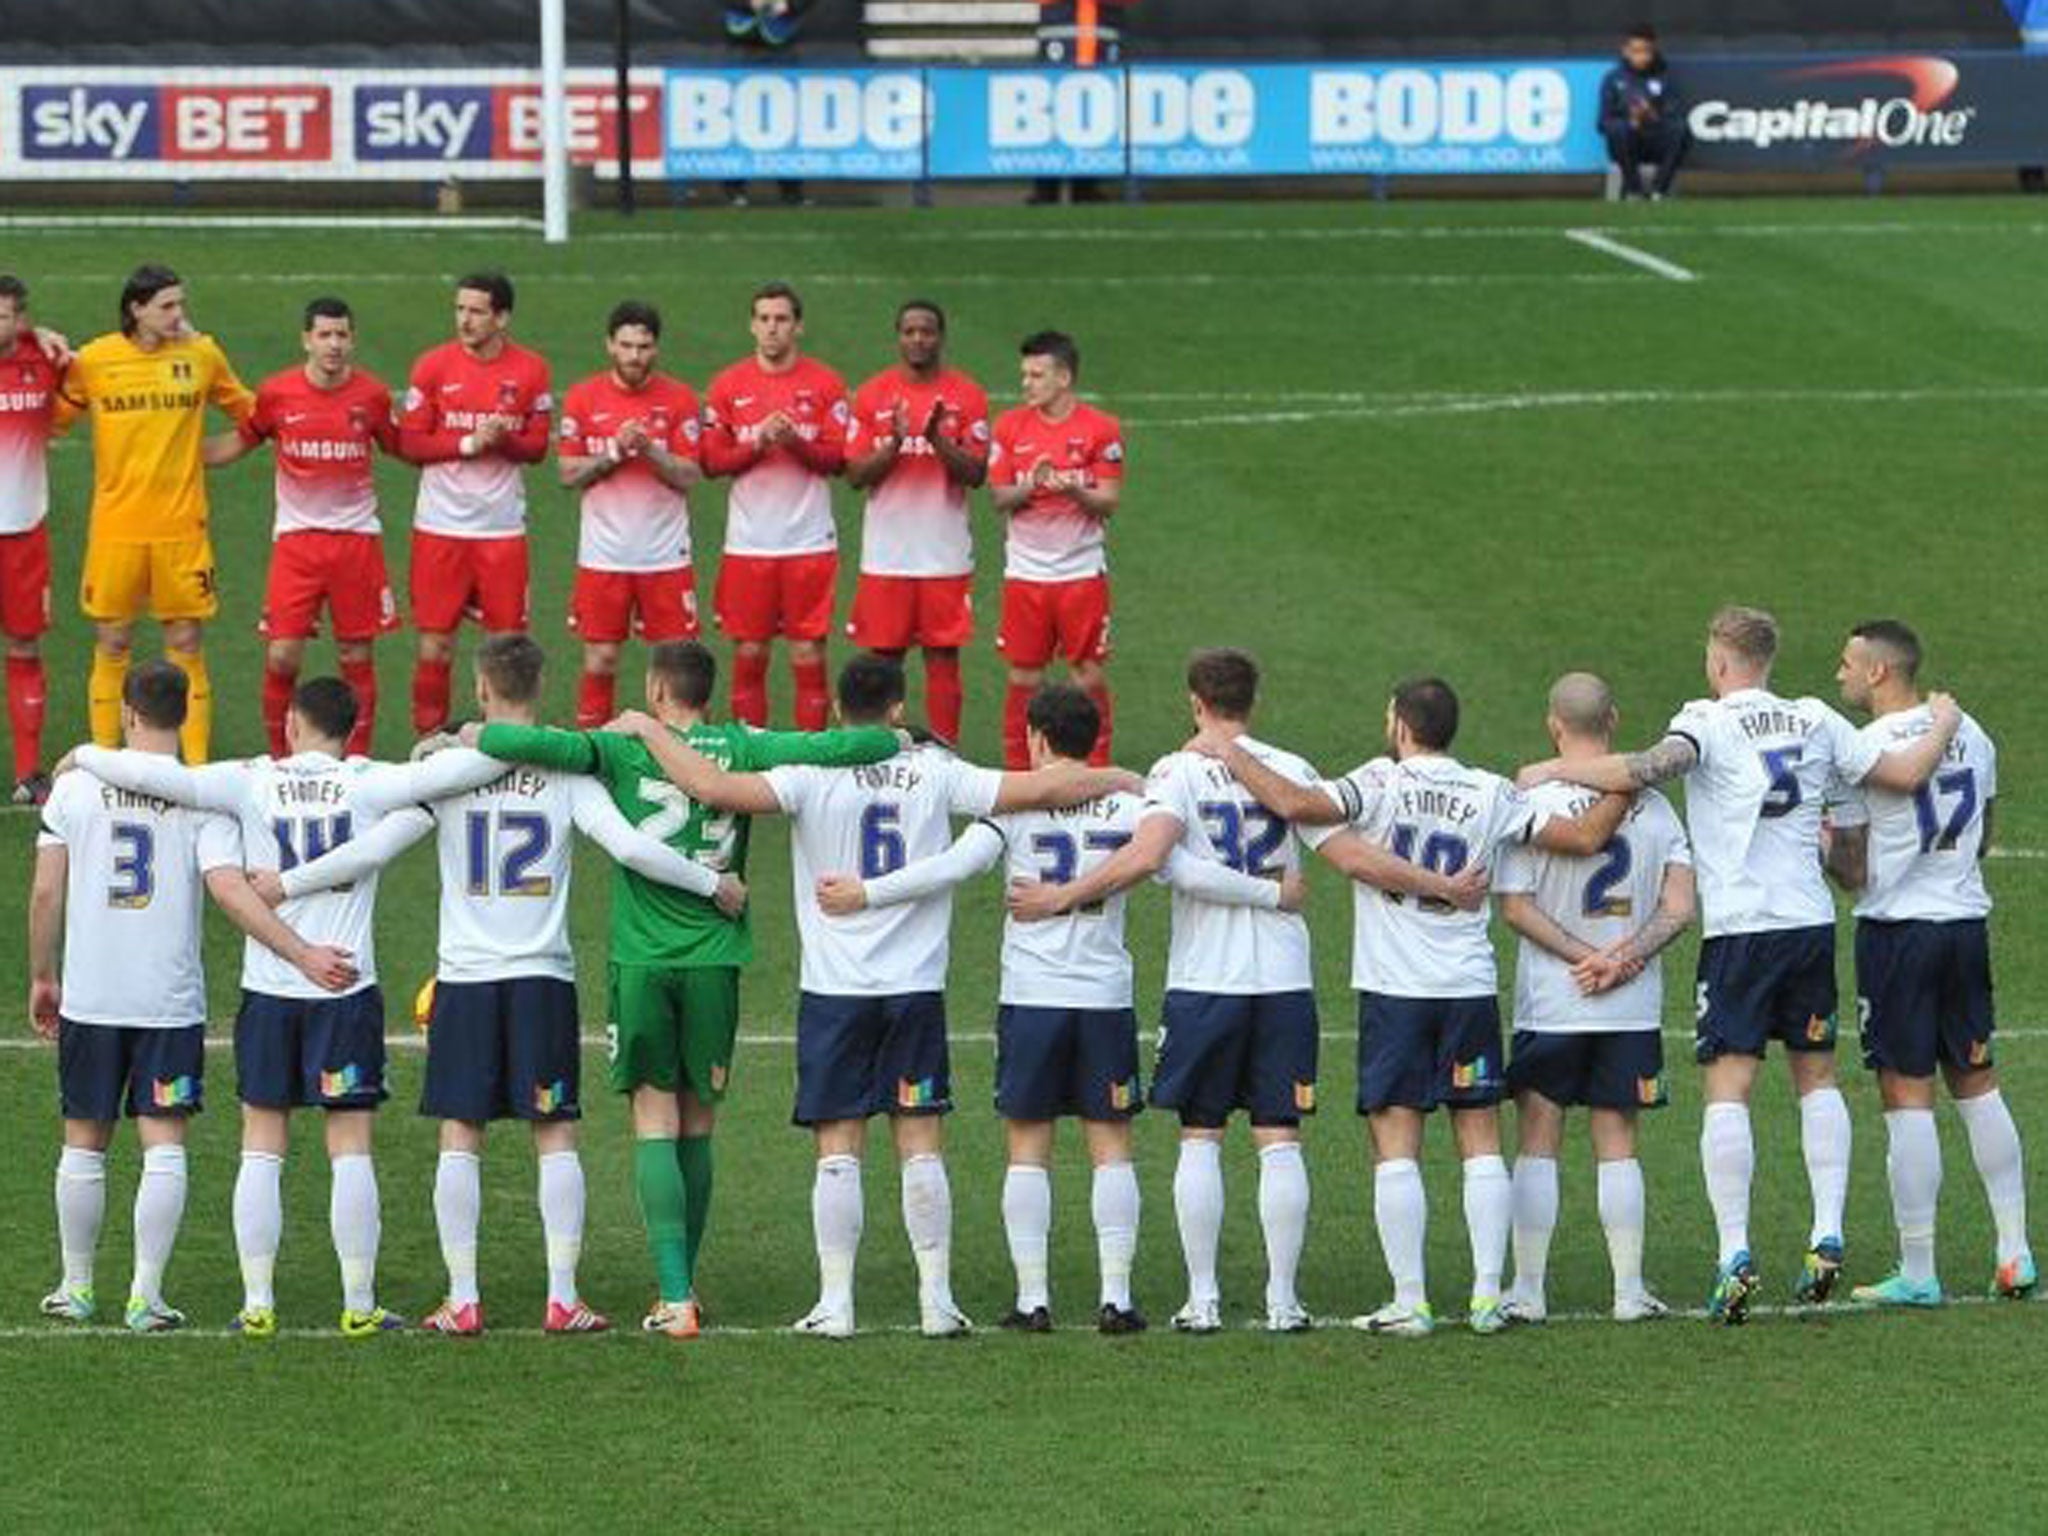 North End players in a pre-match tribute, all sporting ‘Finney’ shirts